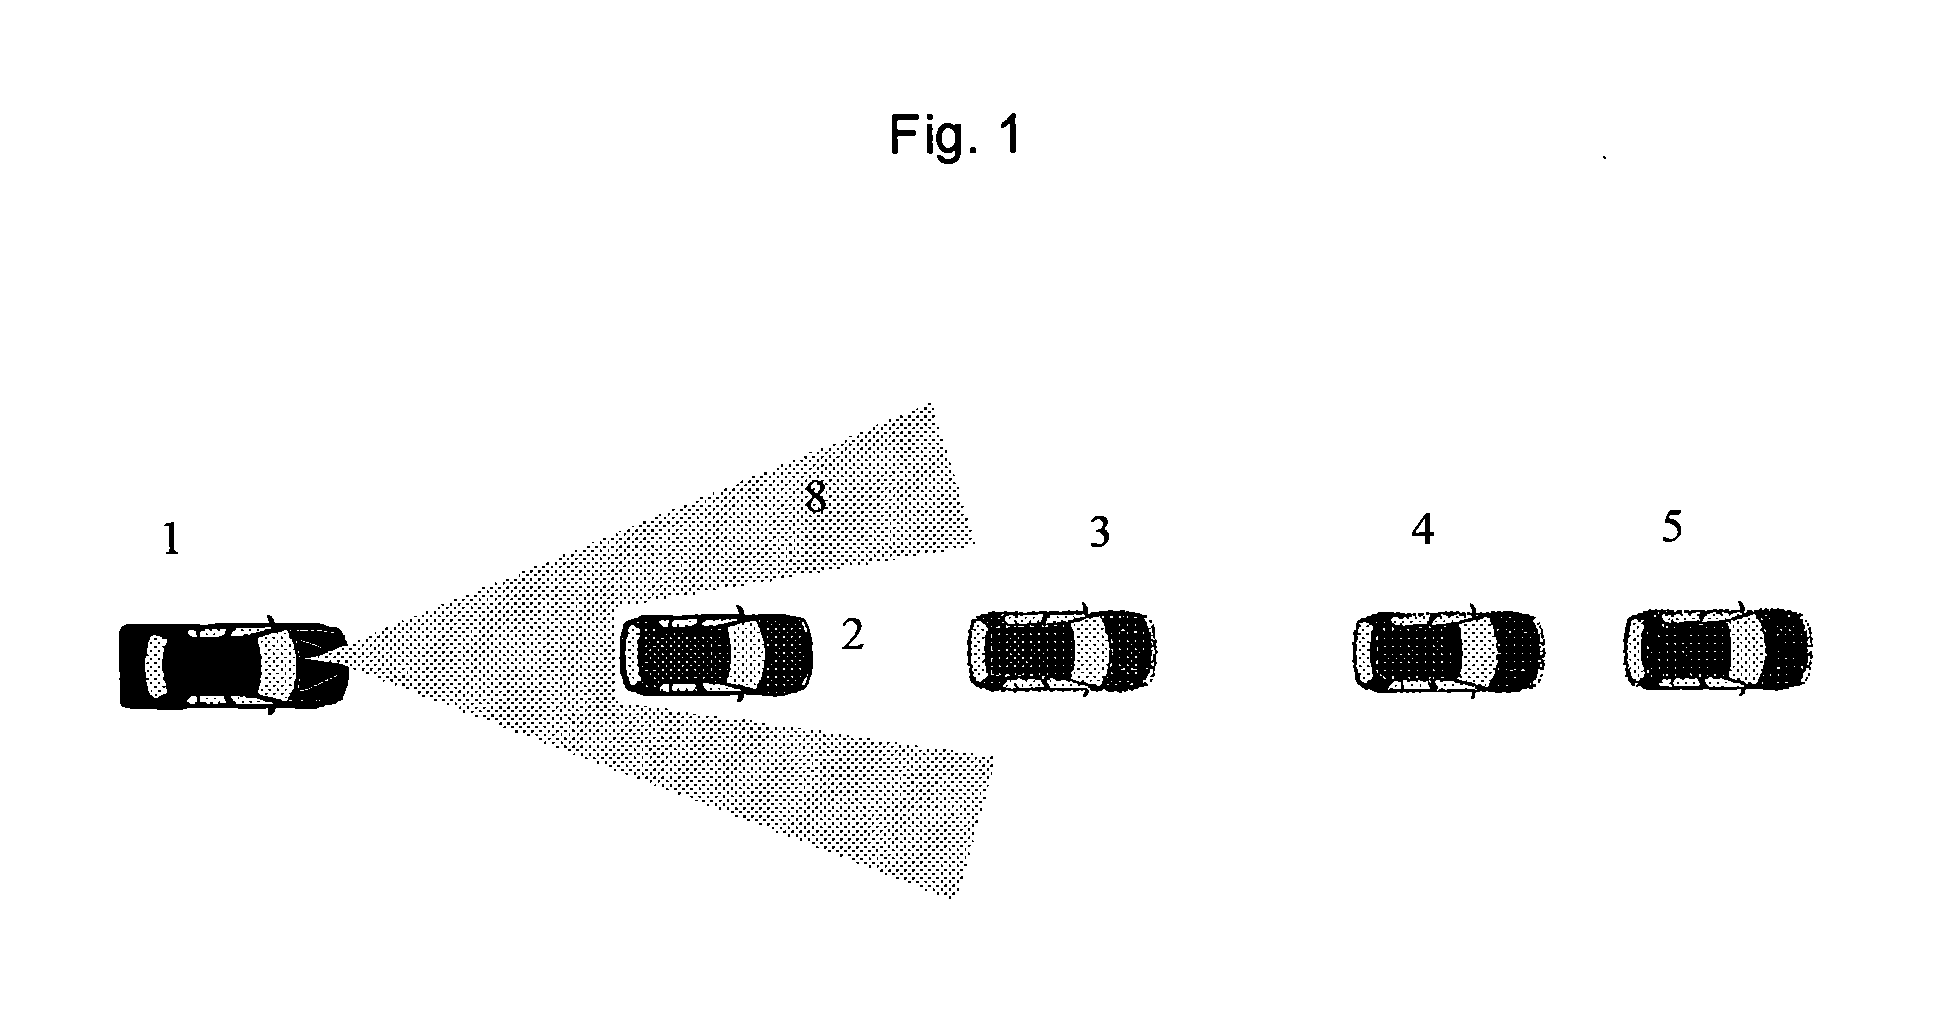 System for Reducing The Braking Distance of a Vehicle